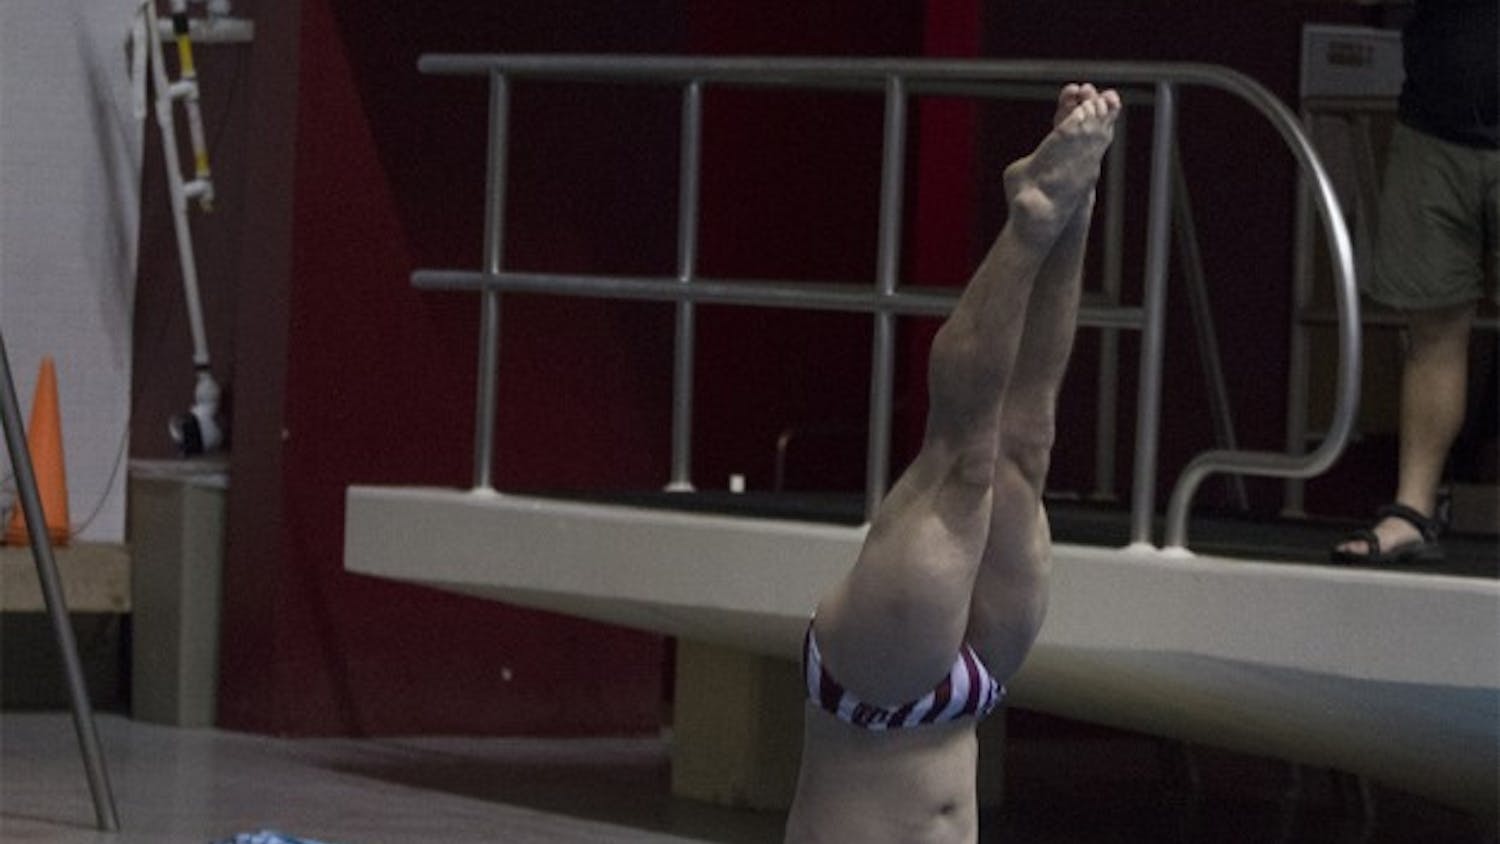 Diver Joshua Arndt goes into his fifth dive of the three-meter competition on Friday at Counsilman Billingsley Aquatic Center. Arndt competed with Cody Coldren and nine other divers in the quad meet.